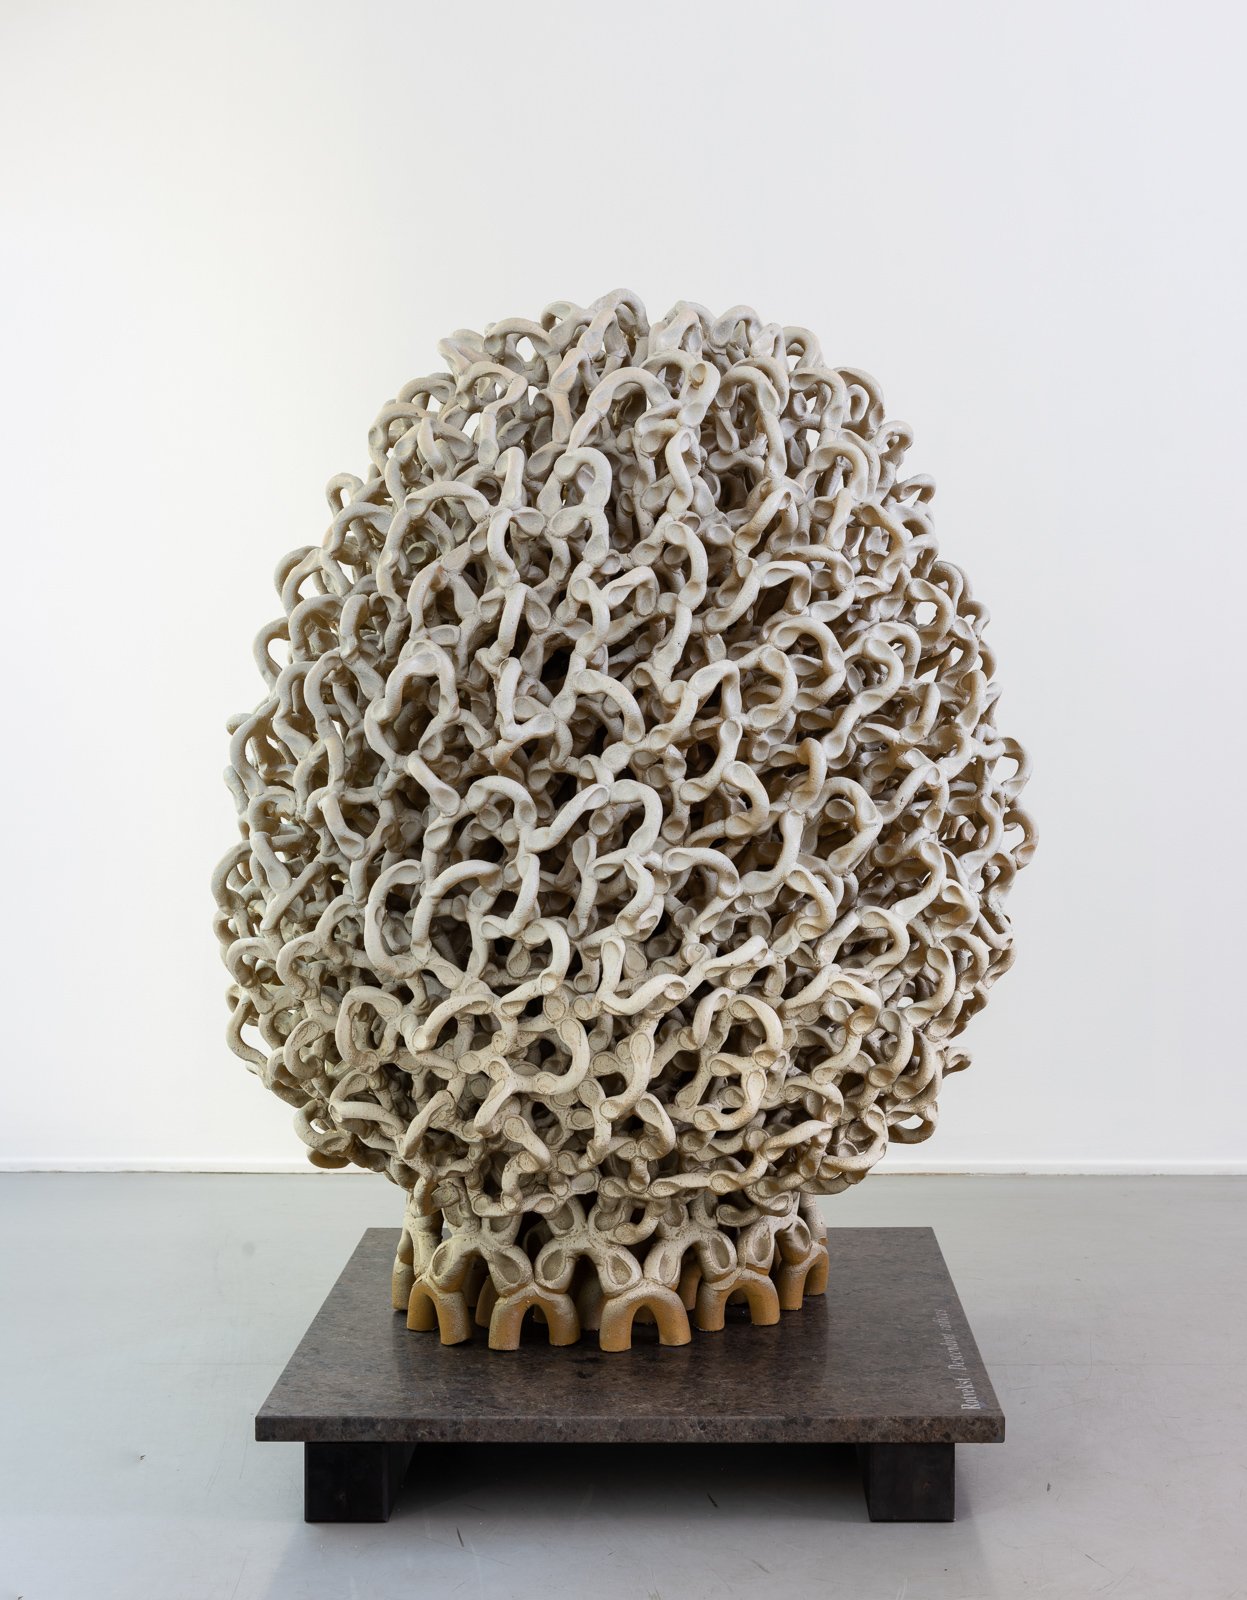  Rotvekst / Root Crop /  Descendunt radices   2021, Modeled in stoneware, airbrushed with porcelain slip and brushed with ceramic glazes. Base in granite and treated wood.  Photo: Thomas Tveter 